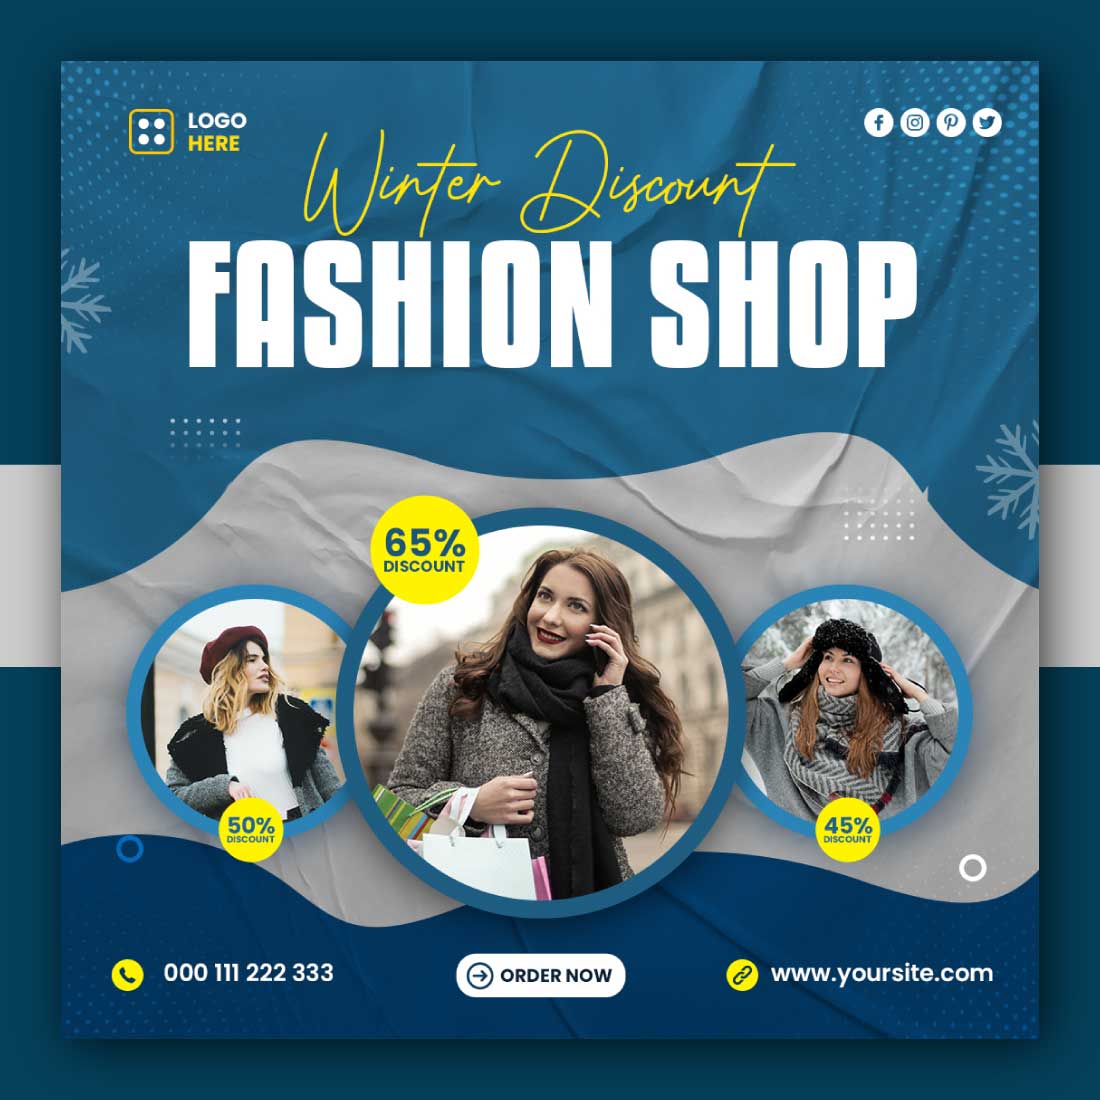 Winter Discount Fashion Shop Social Media Instagram Post Template main cover.